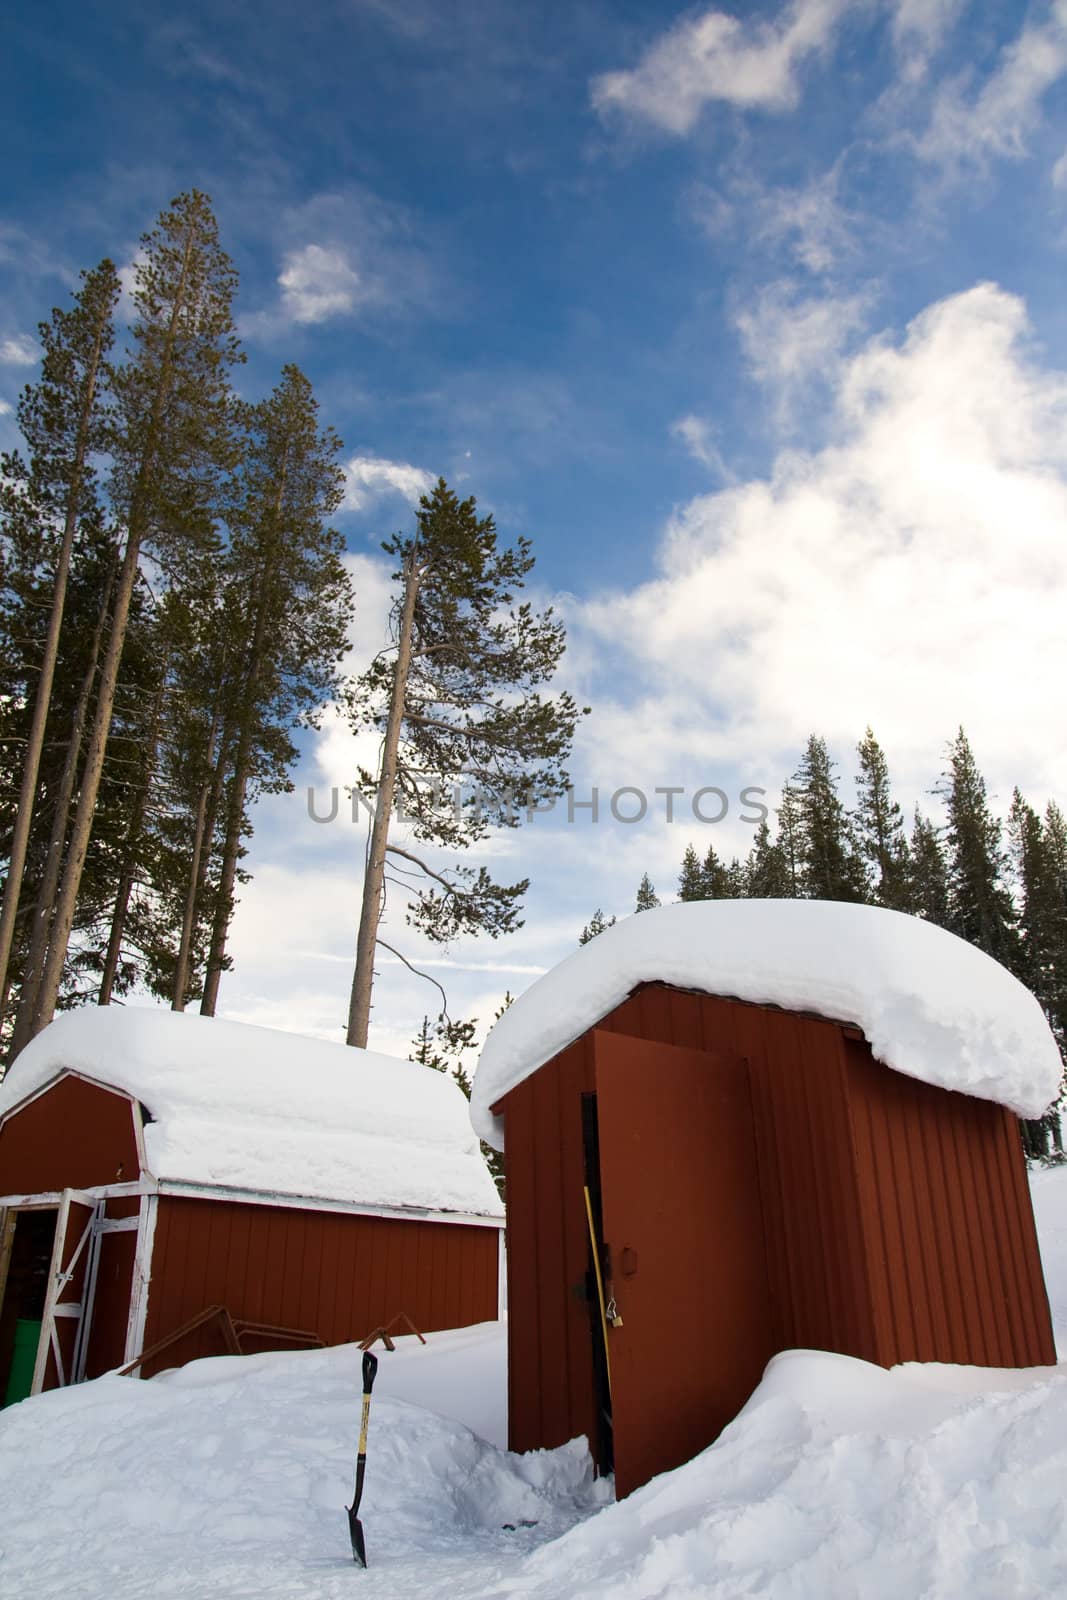 Winter landscape with small wooden sheds and pine trees